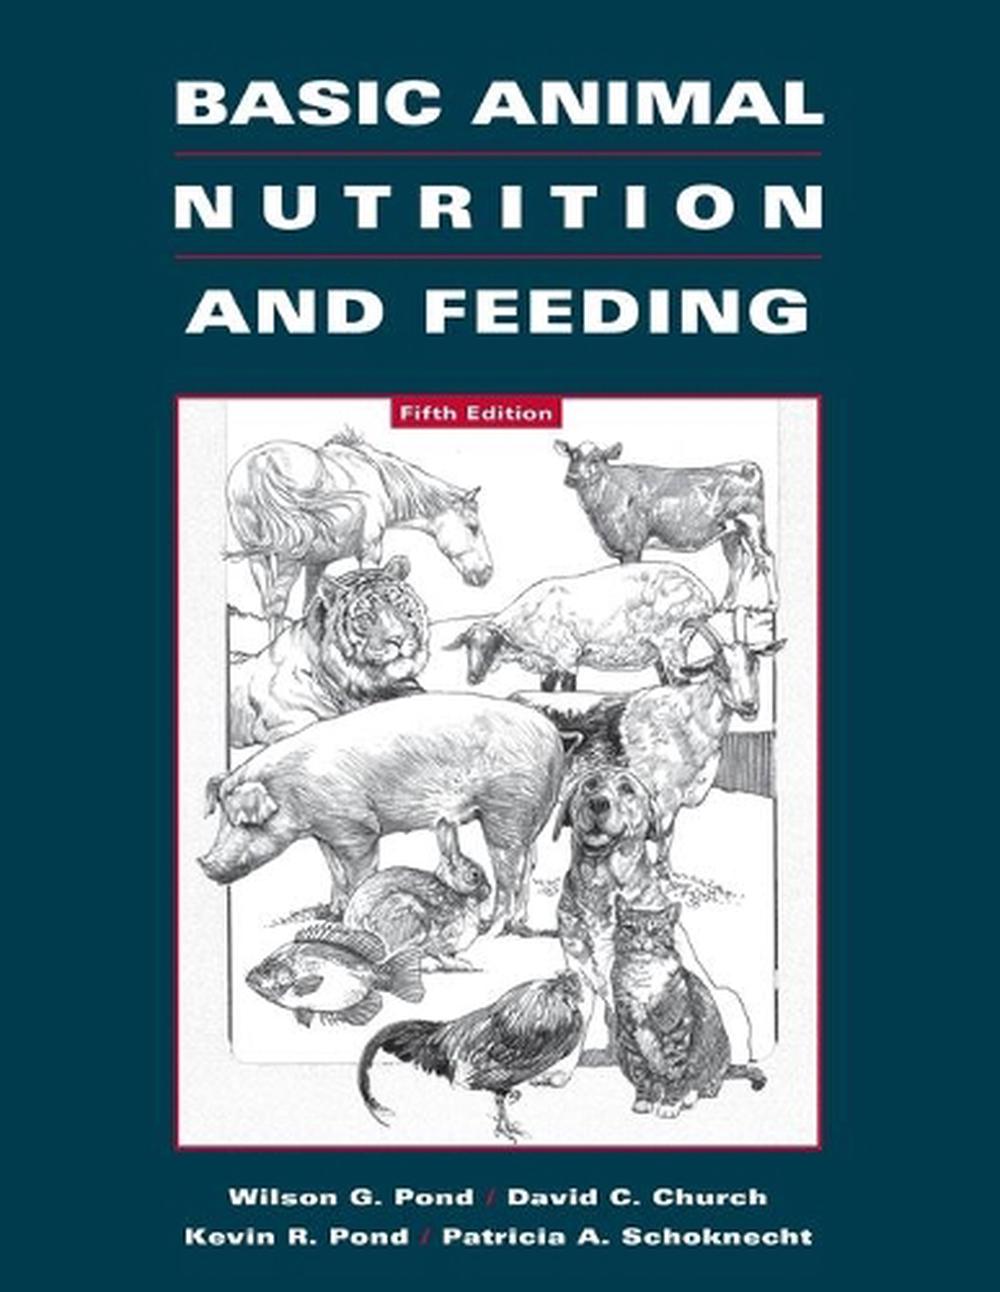 Basic Animal Nutrition and Feeding by Wilson G. Pond, Paperback